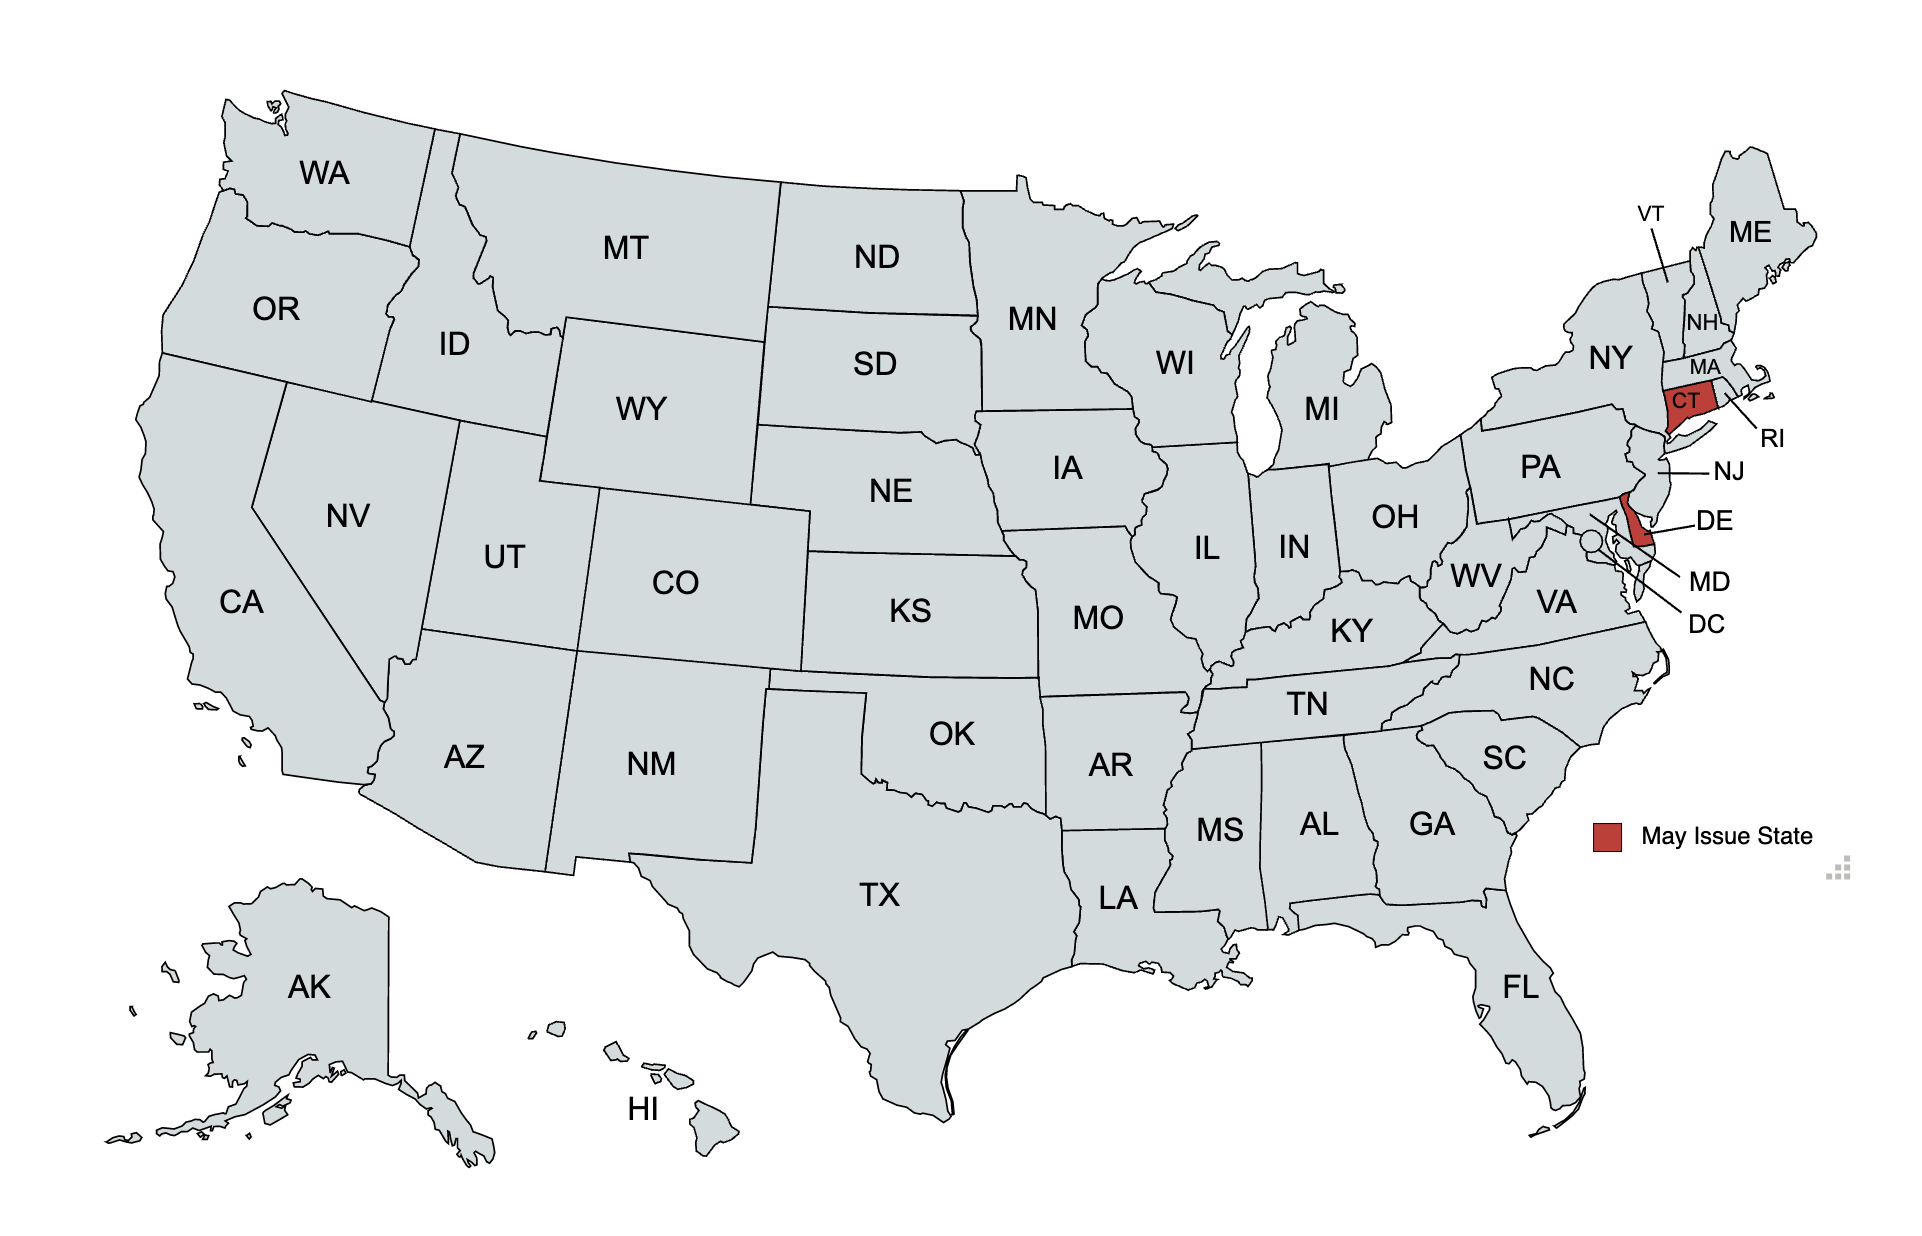 Map detailing may issue states versus shall issue states.